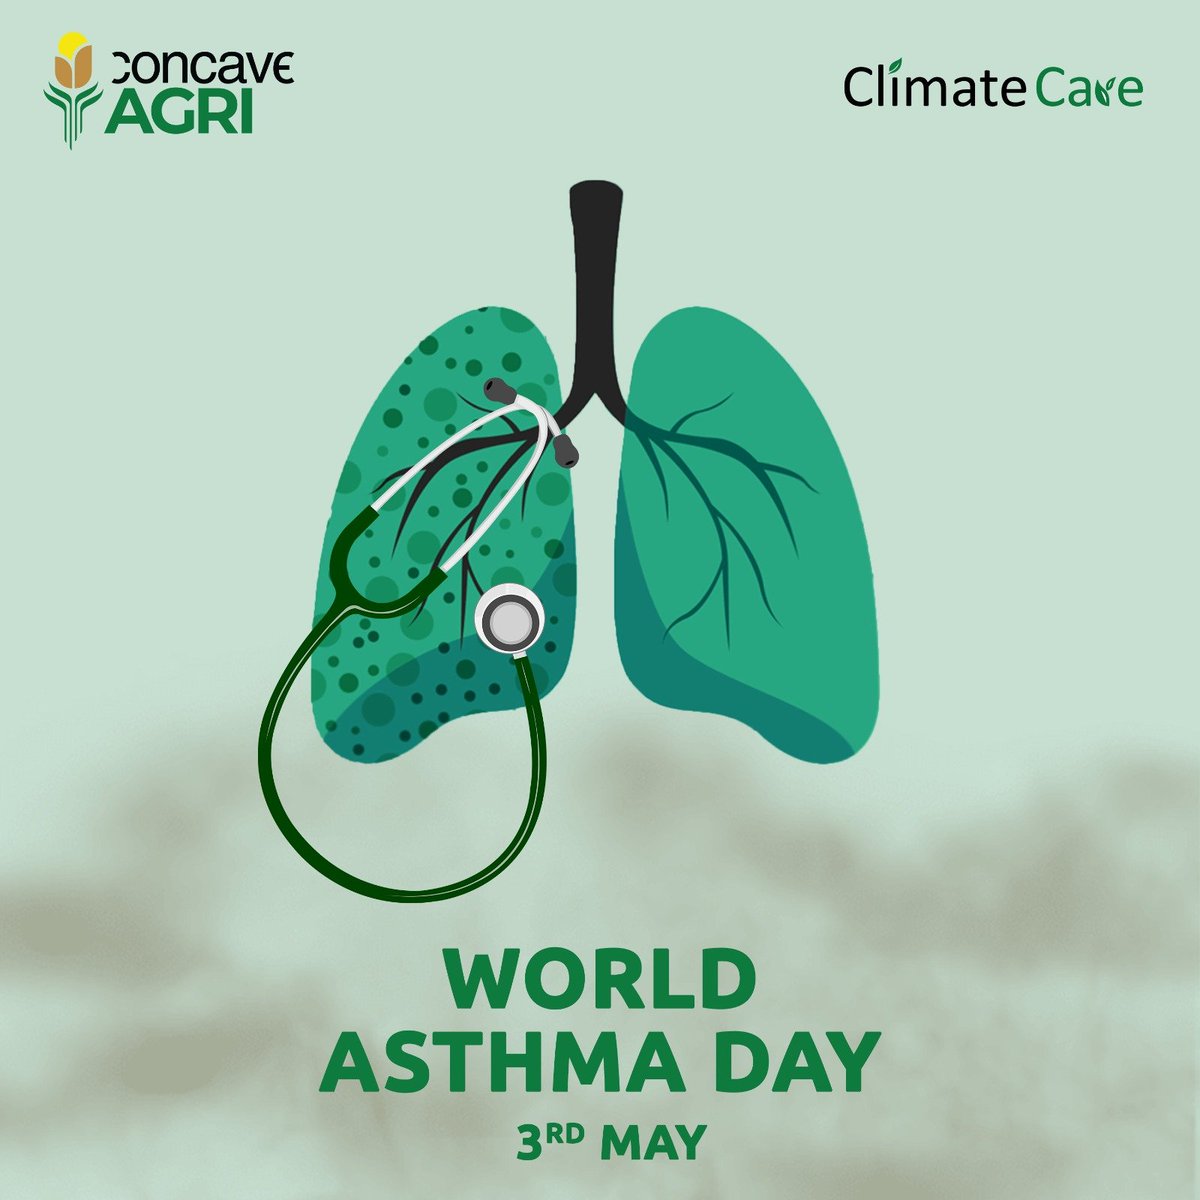 Breathing clean air is crucial for healthy living, and as farmers, we have a unique responsibility to protect our environment and the respiratory health of our communities.
#WorldAsthmaDay #CleanAirMatters #SustainableAgriculture #RespiratoryHealth #ProtectOurPlanet #ConcaveAGRI